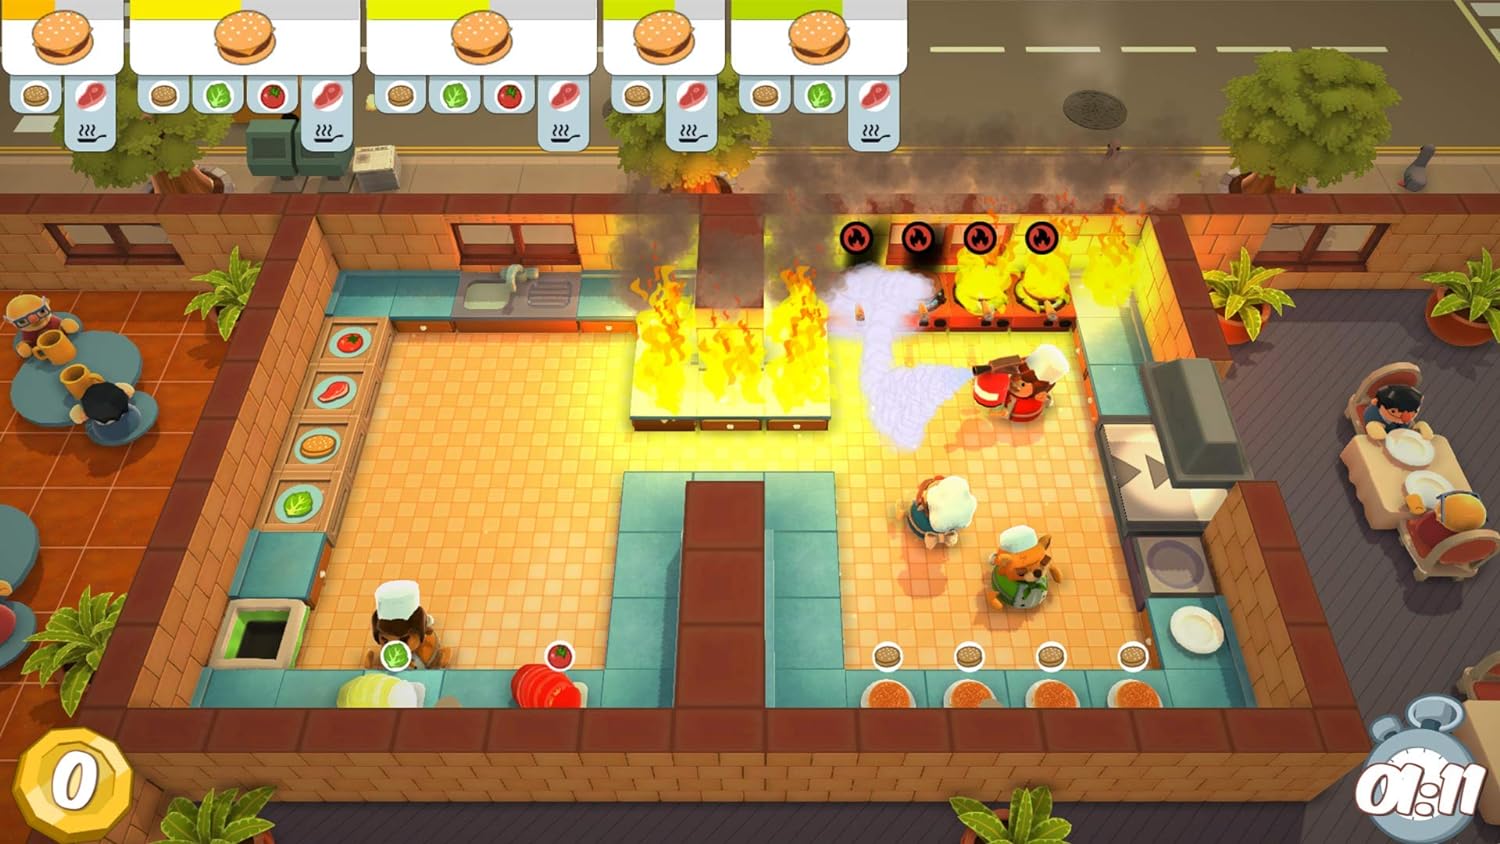 PS4-Overcooked-2-tech-junction-store.